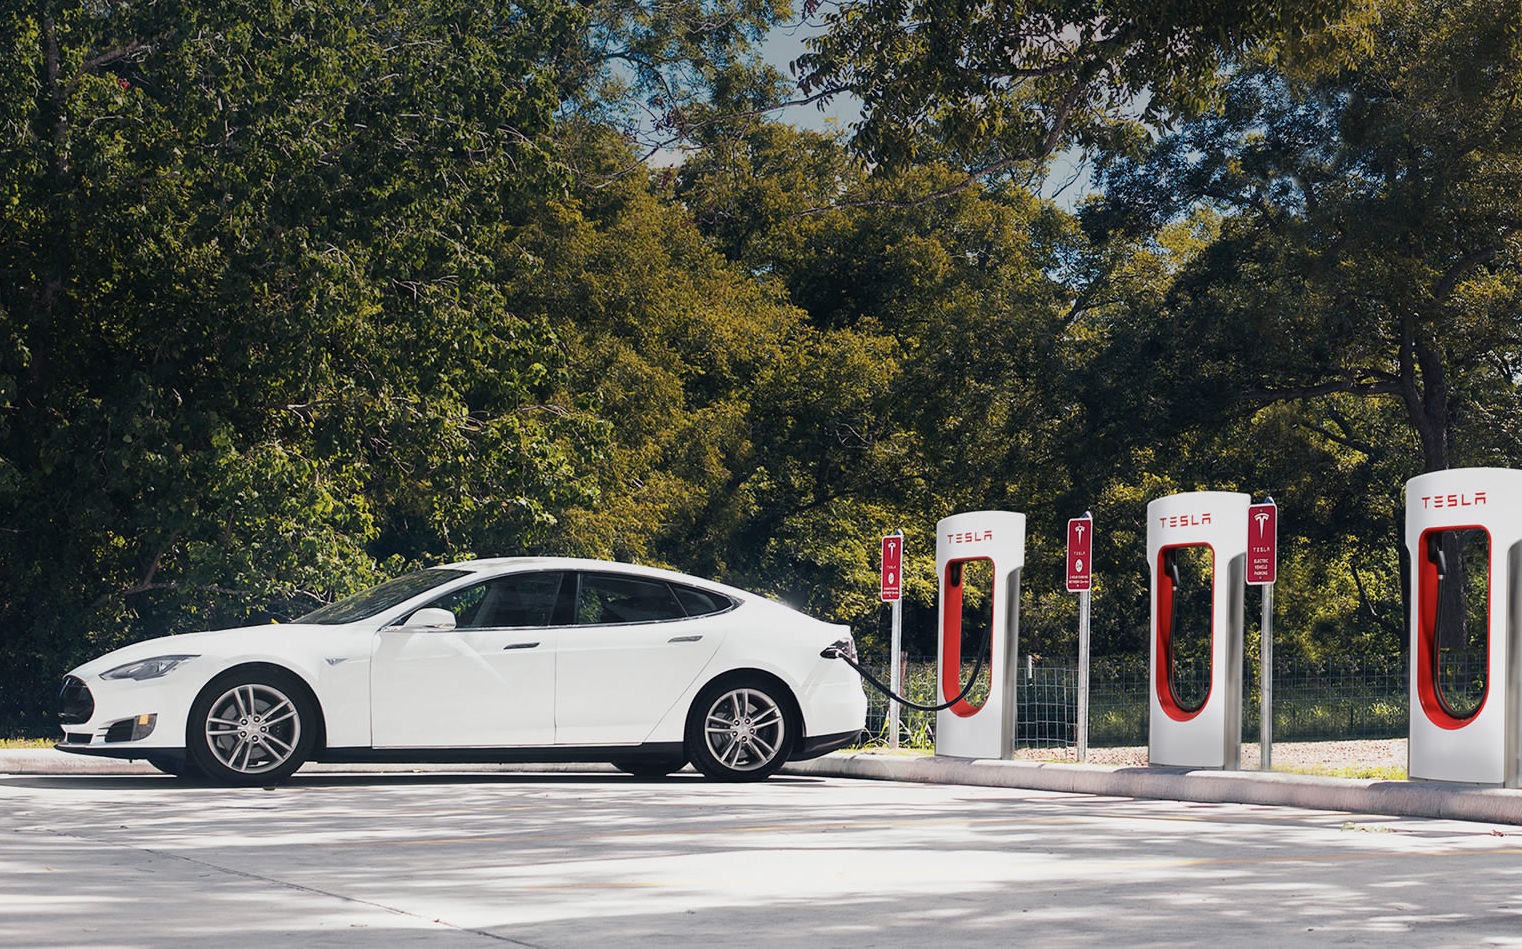 Tesla announces Supercharger no longer free for 2017 customers